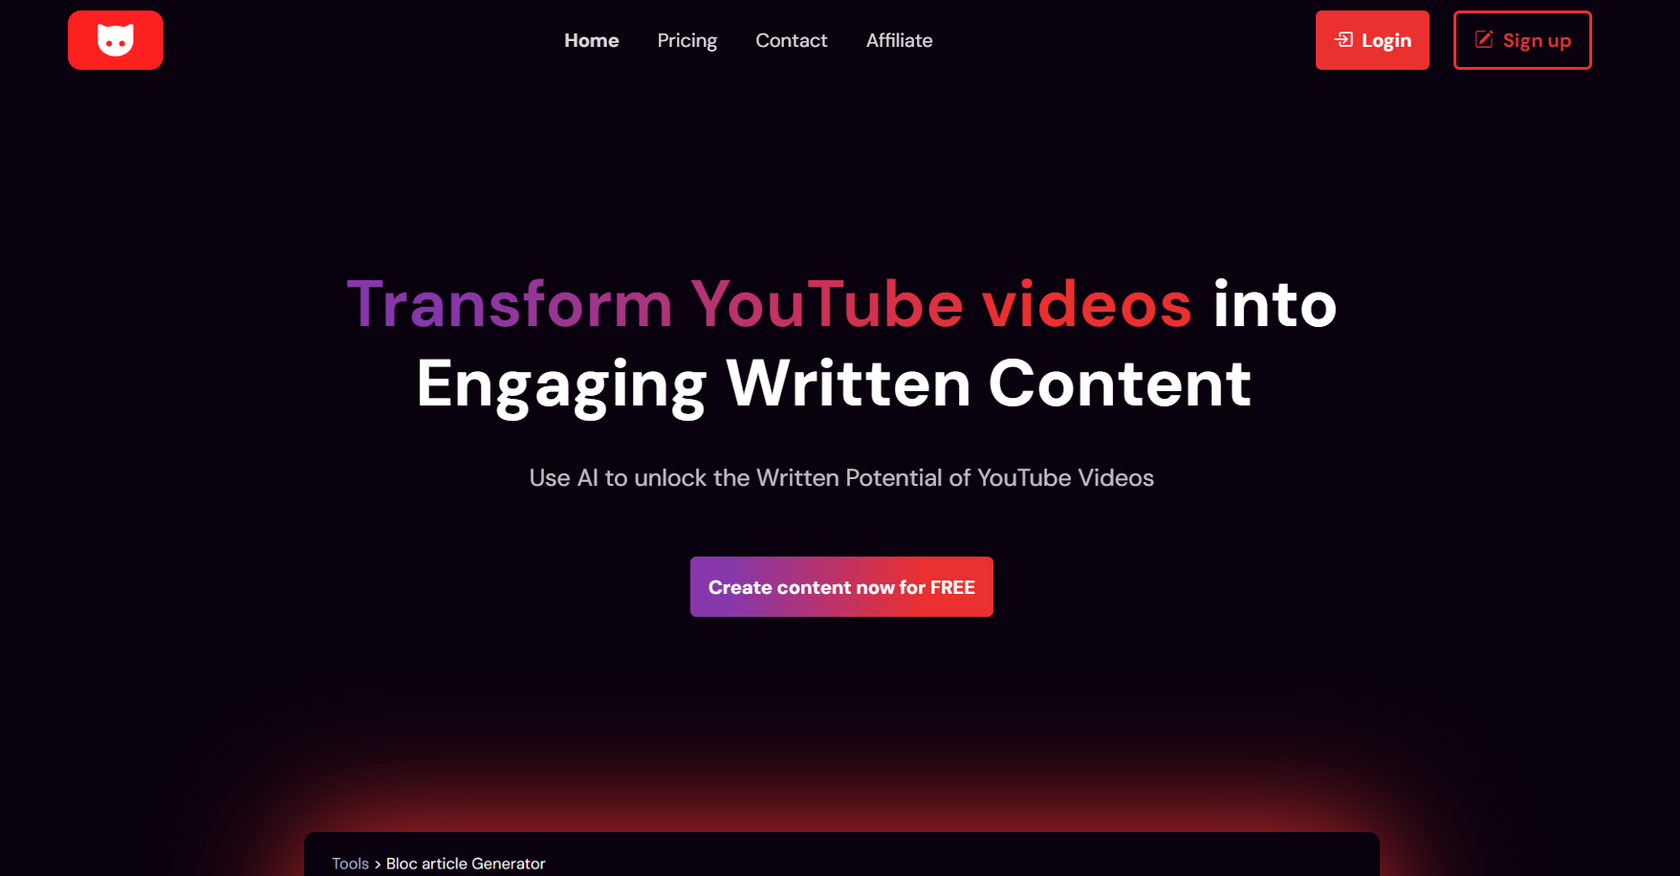 Instantly convert YouTube videos into high-quality text content using AI.